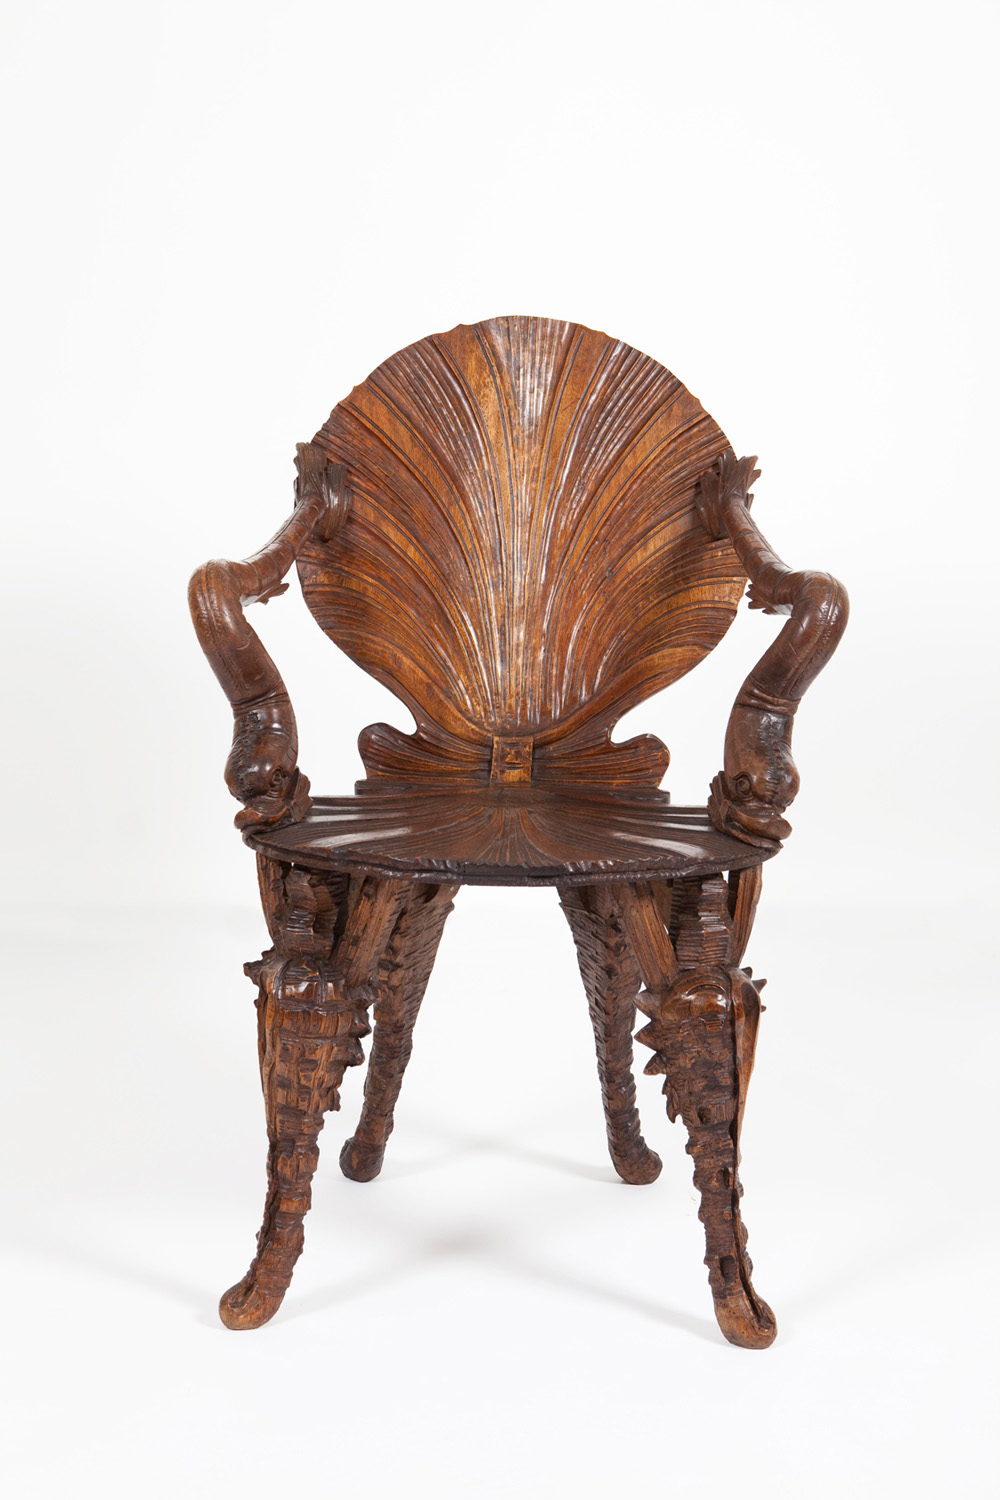 A Venetian Grotto chair hand-carved in walnut wood. Purchased in Italy by John Macmillan Brown c.1900.